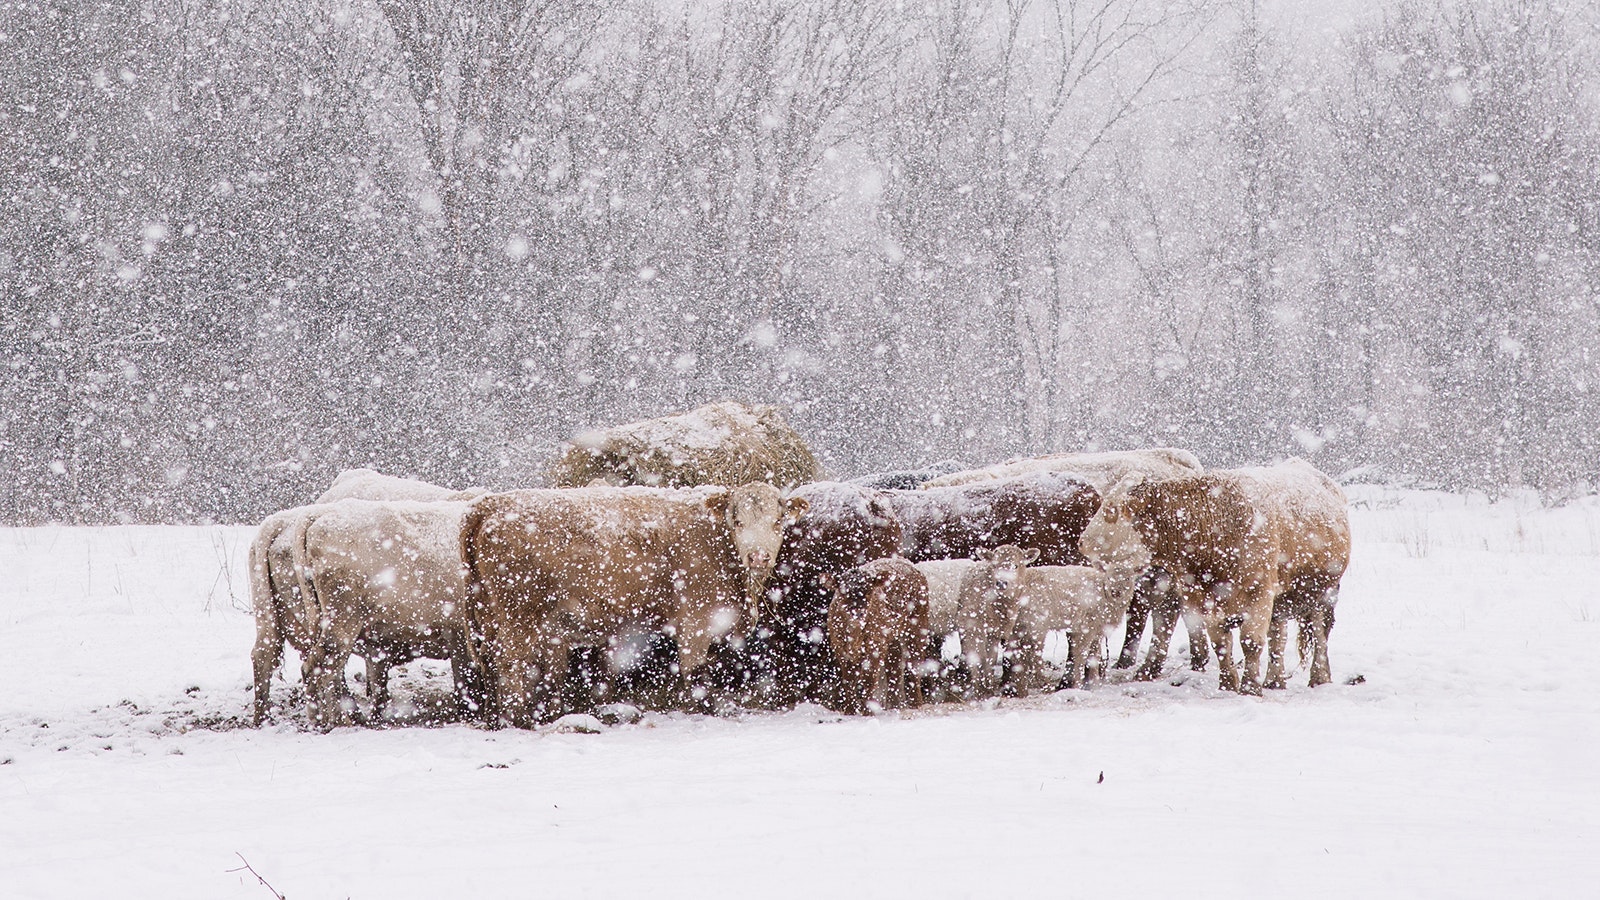 Cows in a blizzard 12 14 23